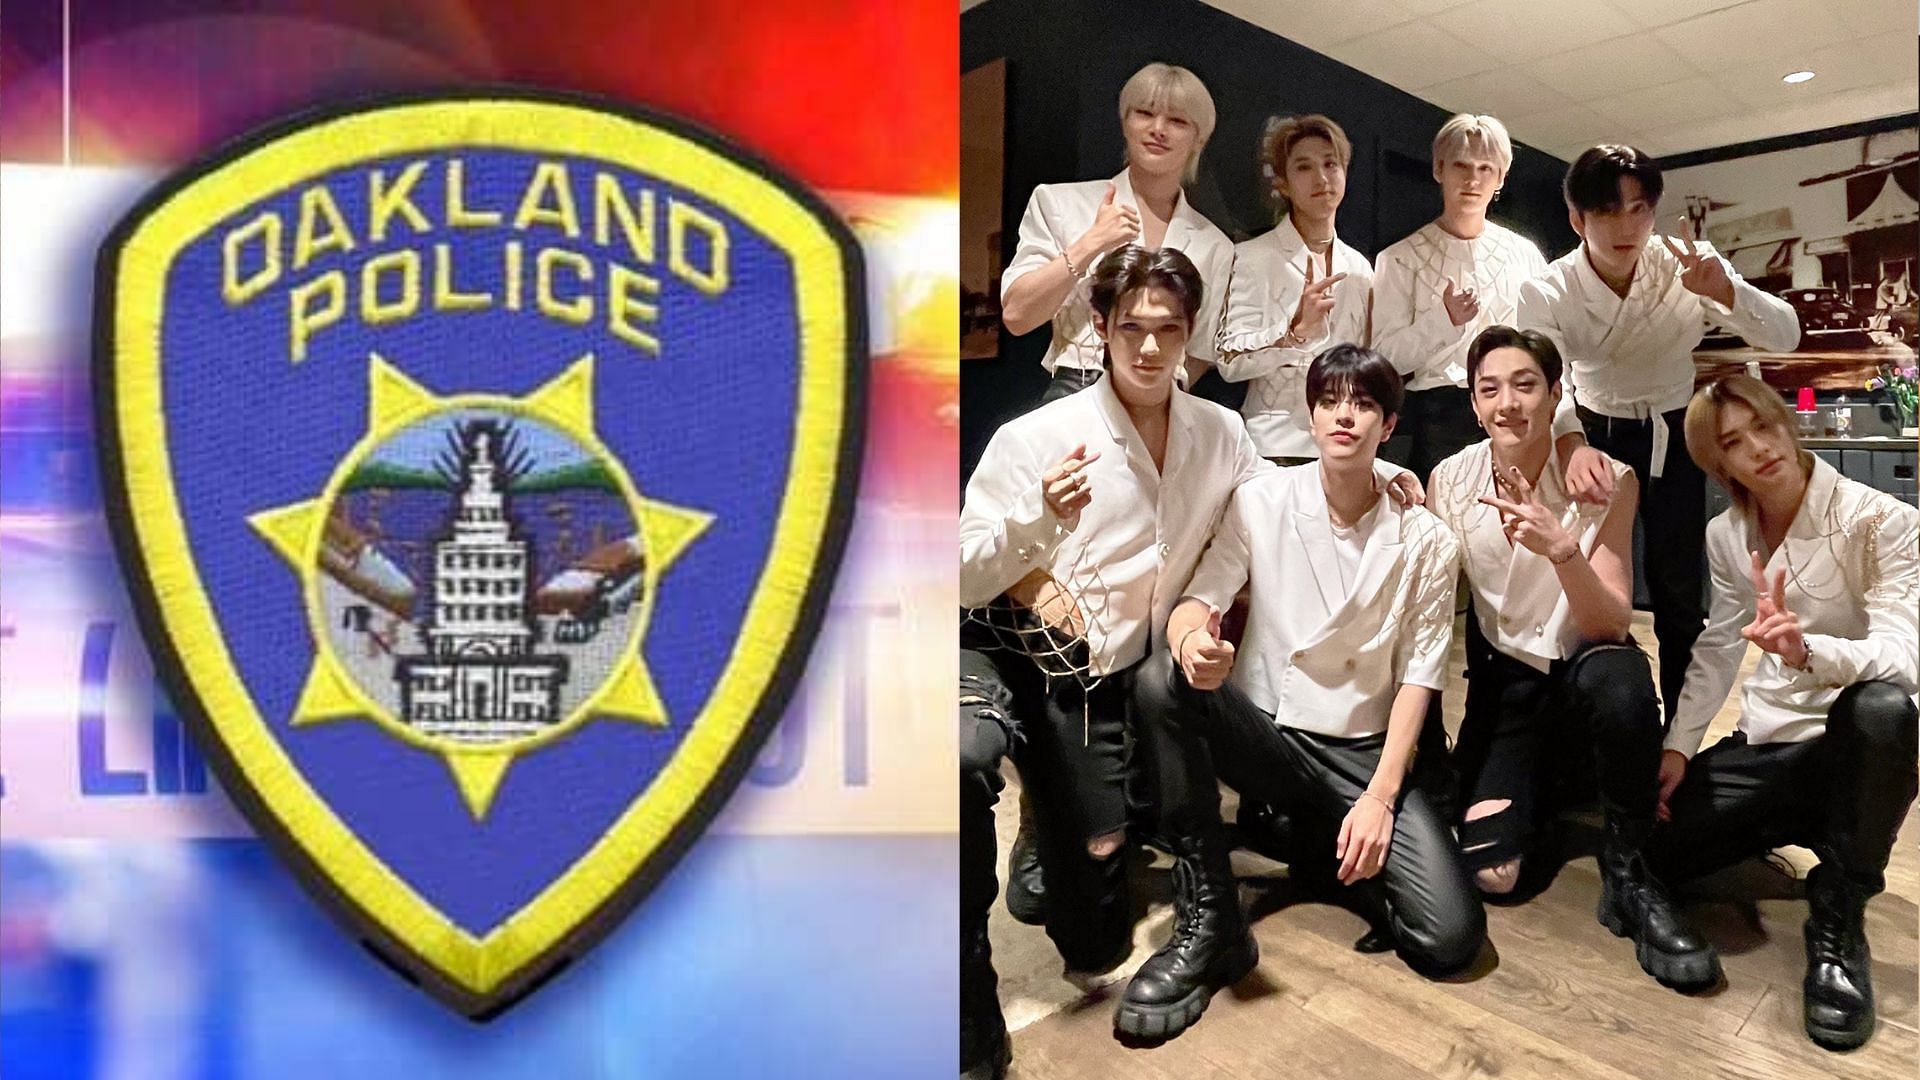 Stray Kids performed with extra security at the Oakland concert (Images via Twitter/@Stray_Kids and @oaklandpoliceca)